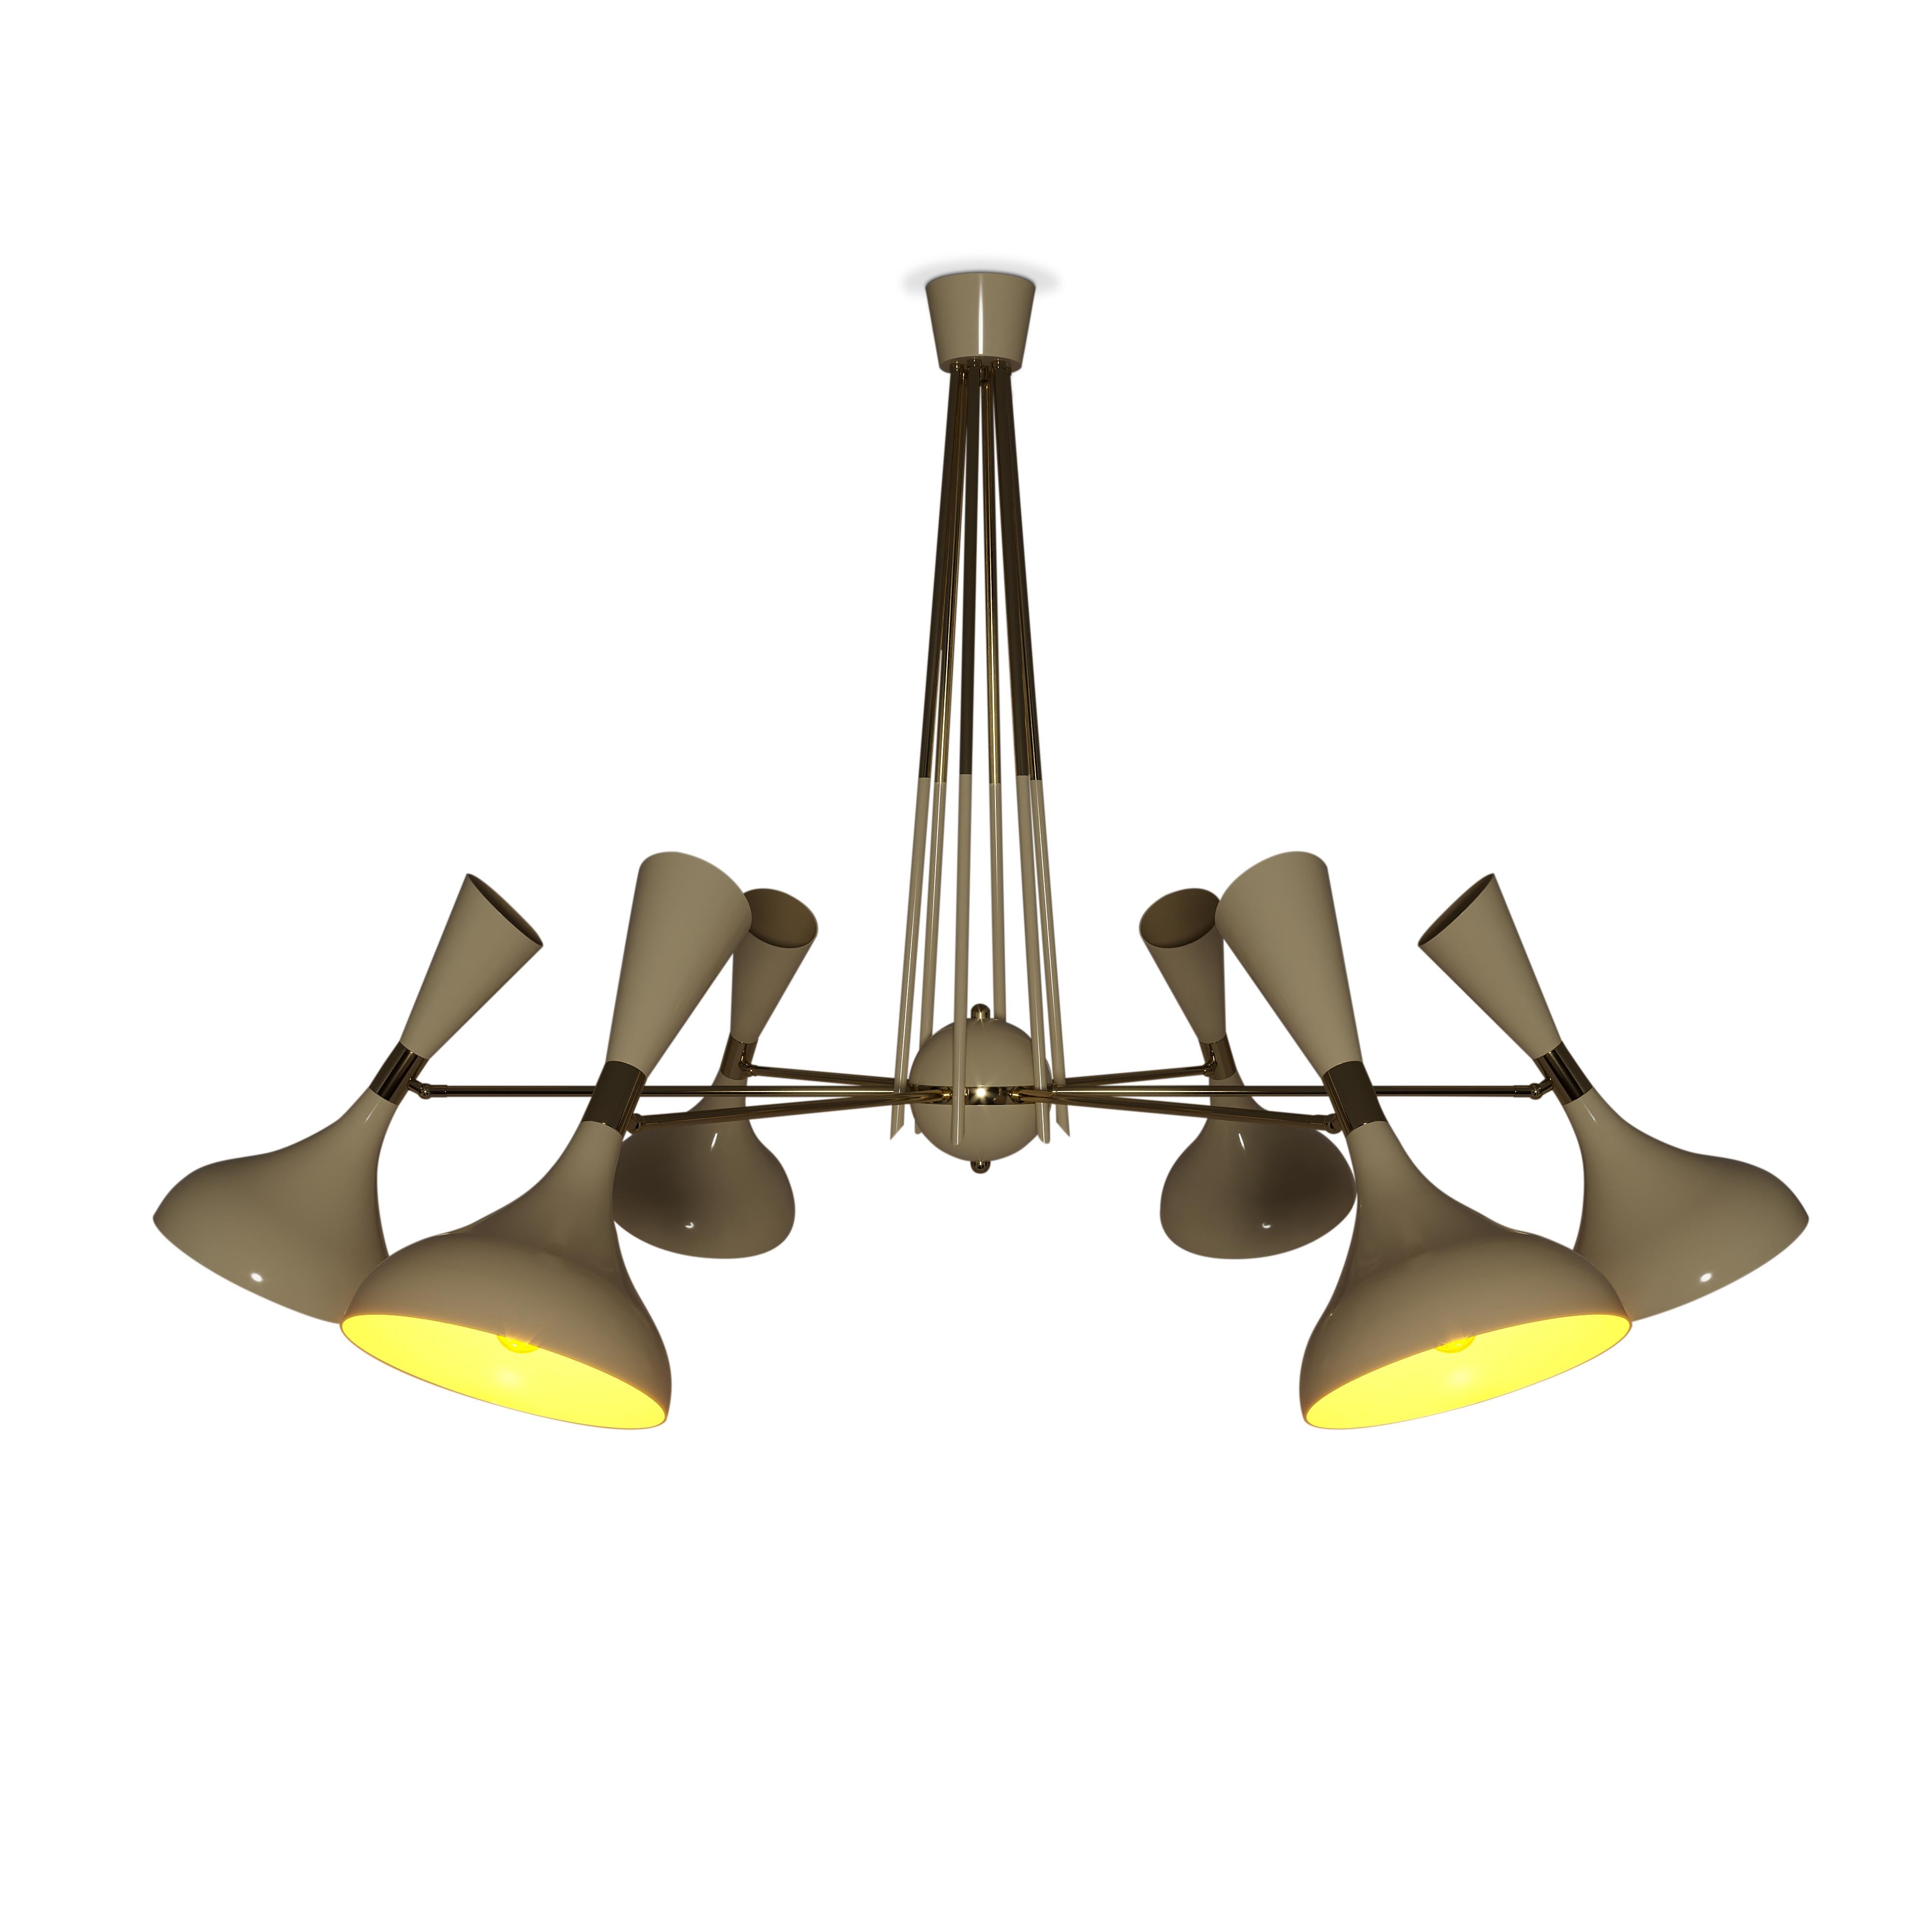 Contemporary 21st Century Helsinki Suspension Lamp Brass Aluminum by Creativemary For Sale